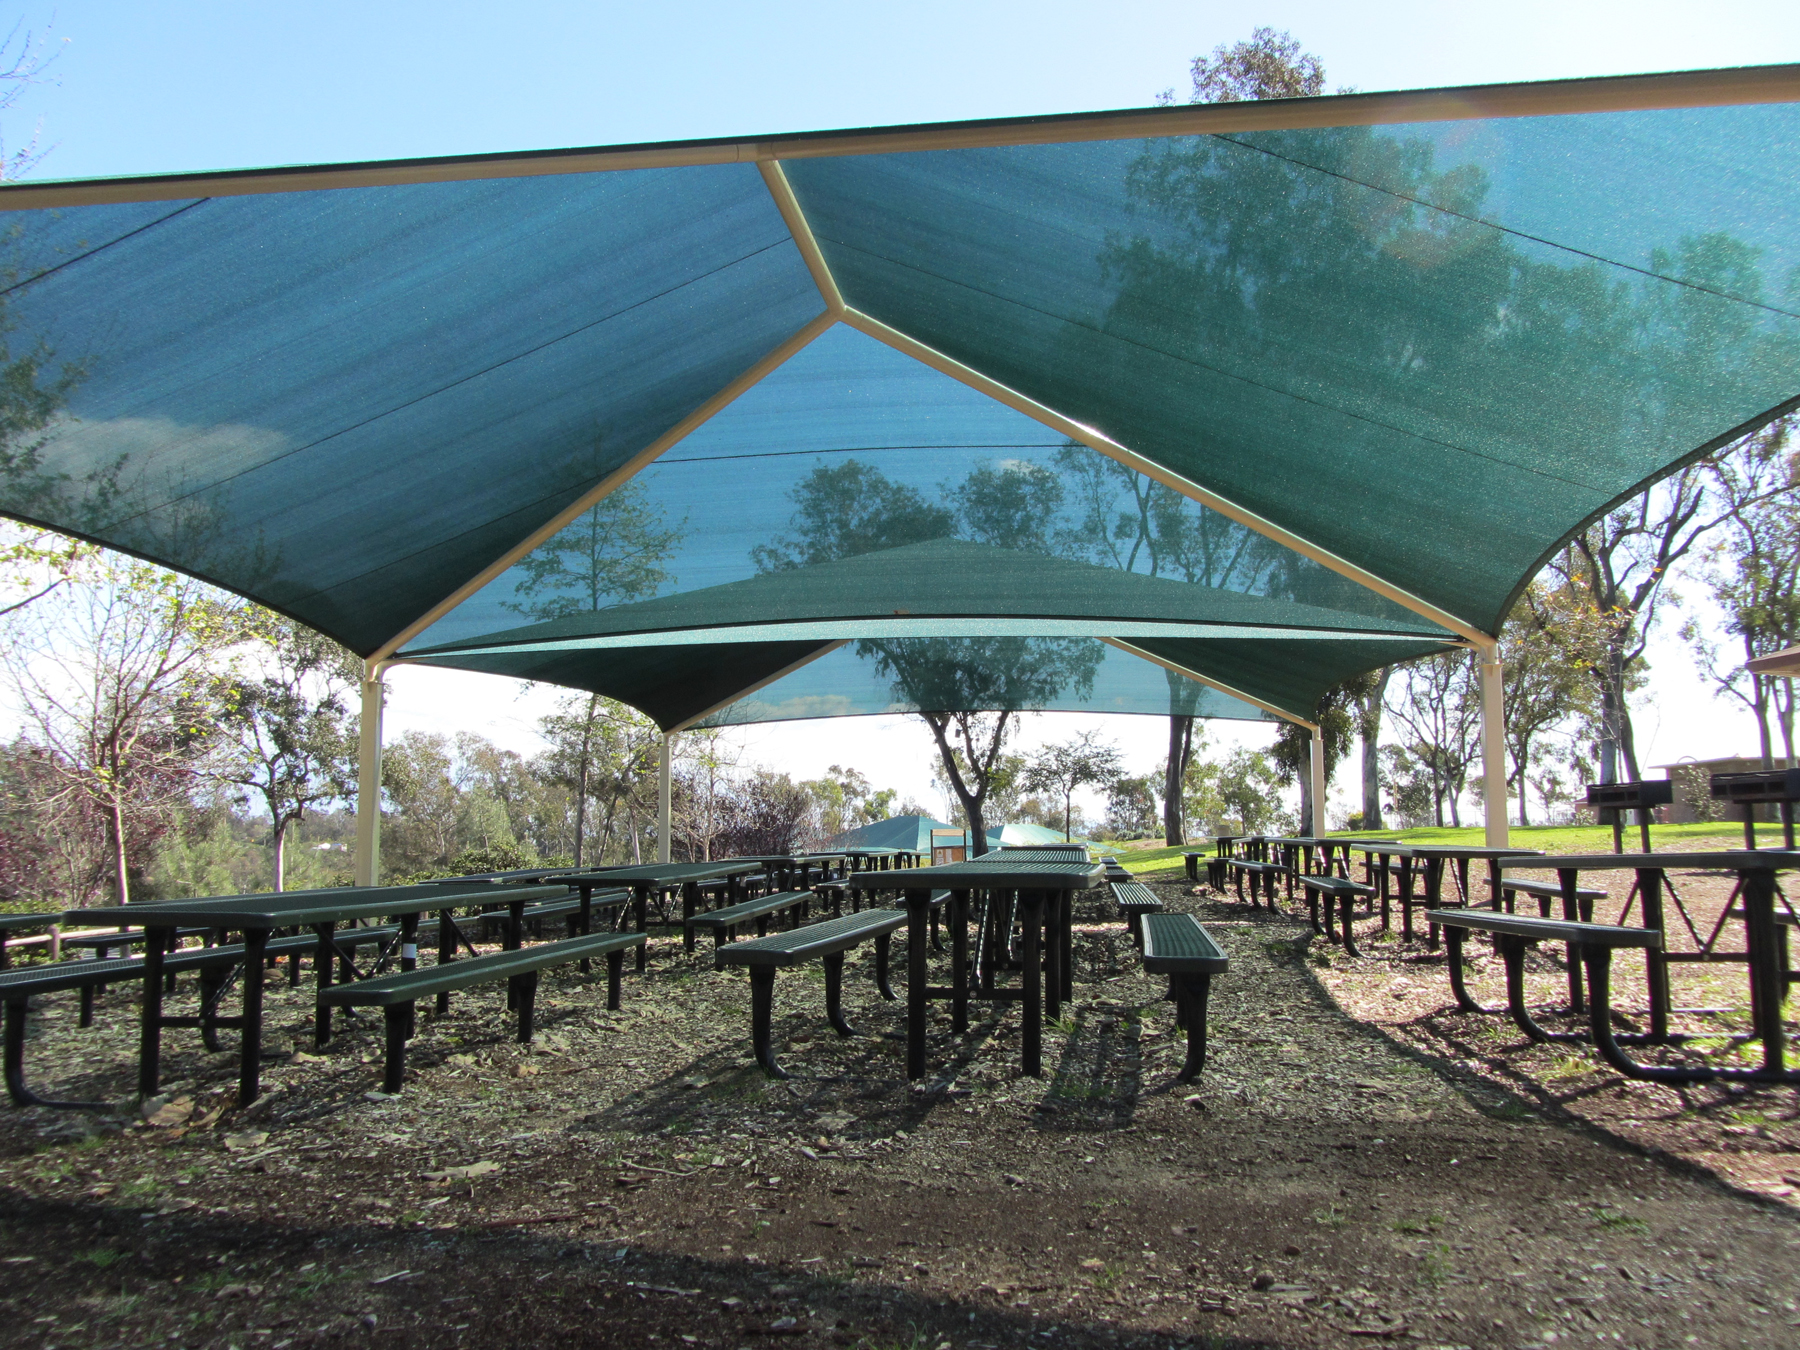 usa shade covering multiple outdoor picnic tables